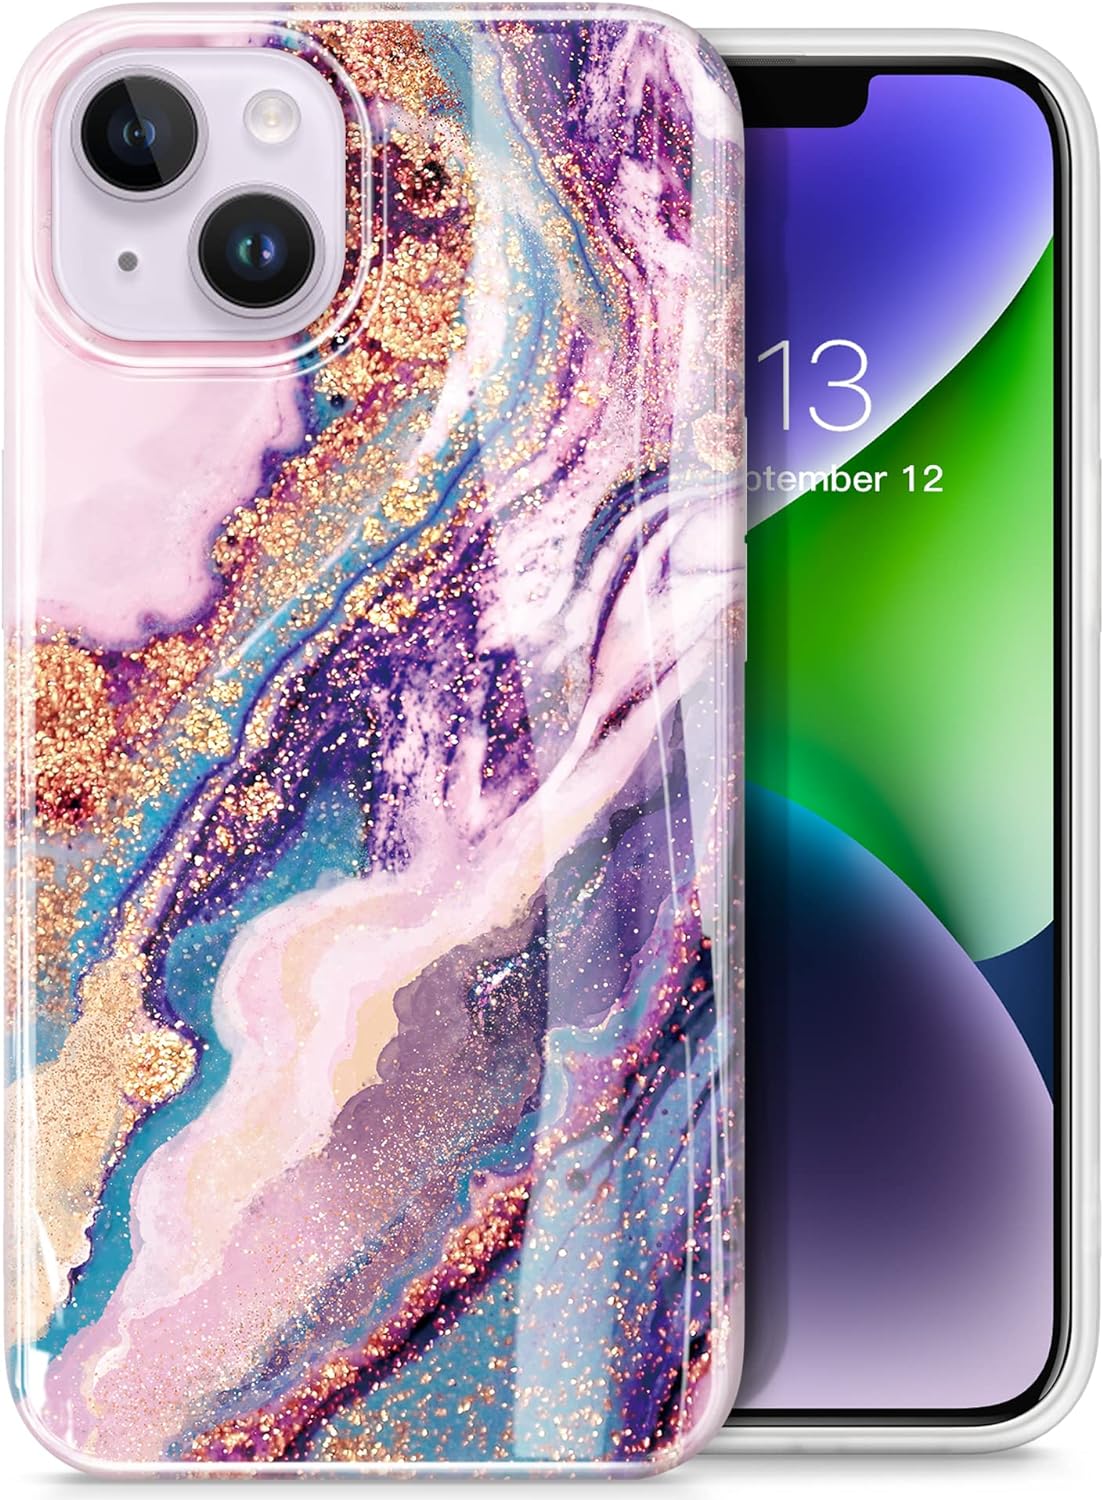 GVIEWIN Designed for iPhone 14 Case, for iPhone 13 Case 6.1, [10FT Military Grade Drop Test] Marble Soft Slim TPU Protective Shockproof Phone Case Cover, Dreamland River/Purple